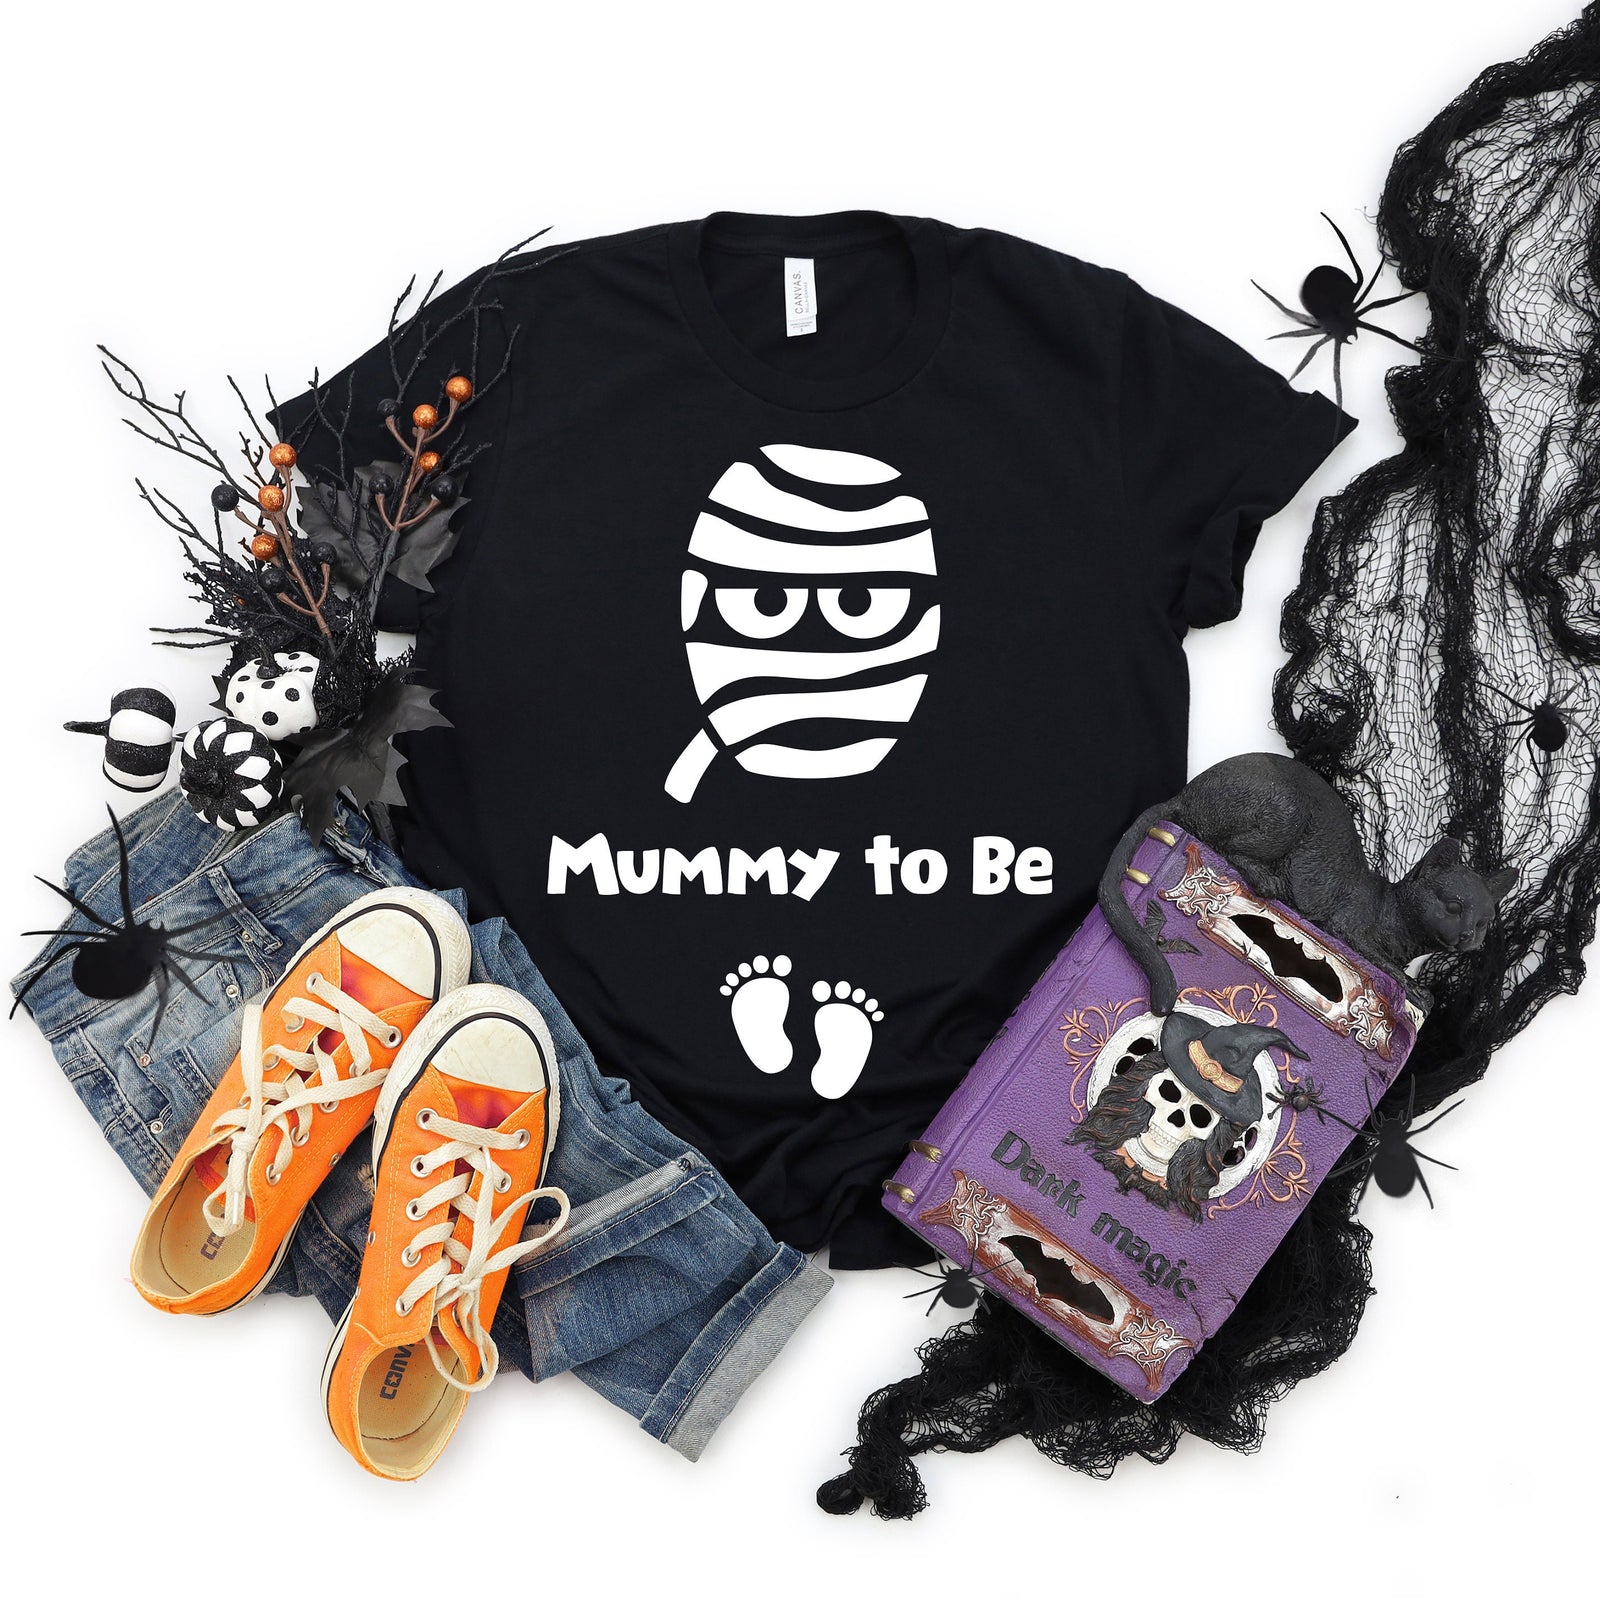 Mummy To Be Adult T Shirt - Halloween - Funny Pregnancy Announcement - Baby Coming Soon